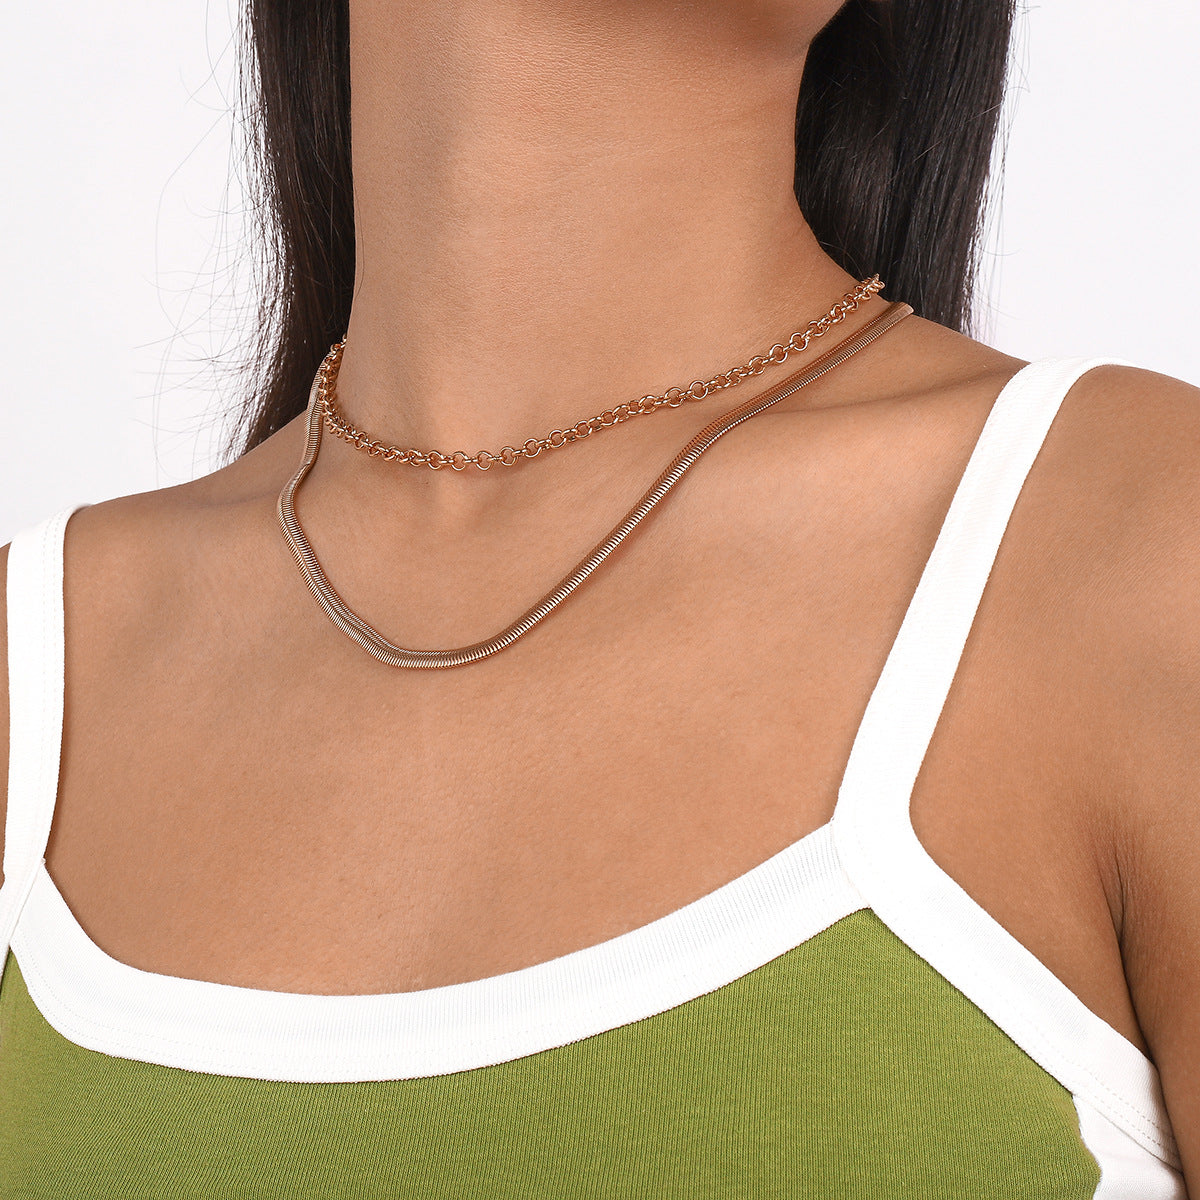 18K Gold-Plated Herringbone Chain Layered Necklace